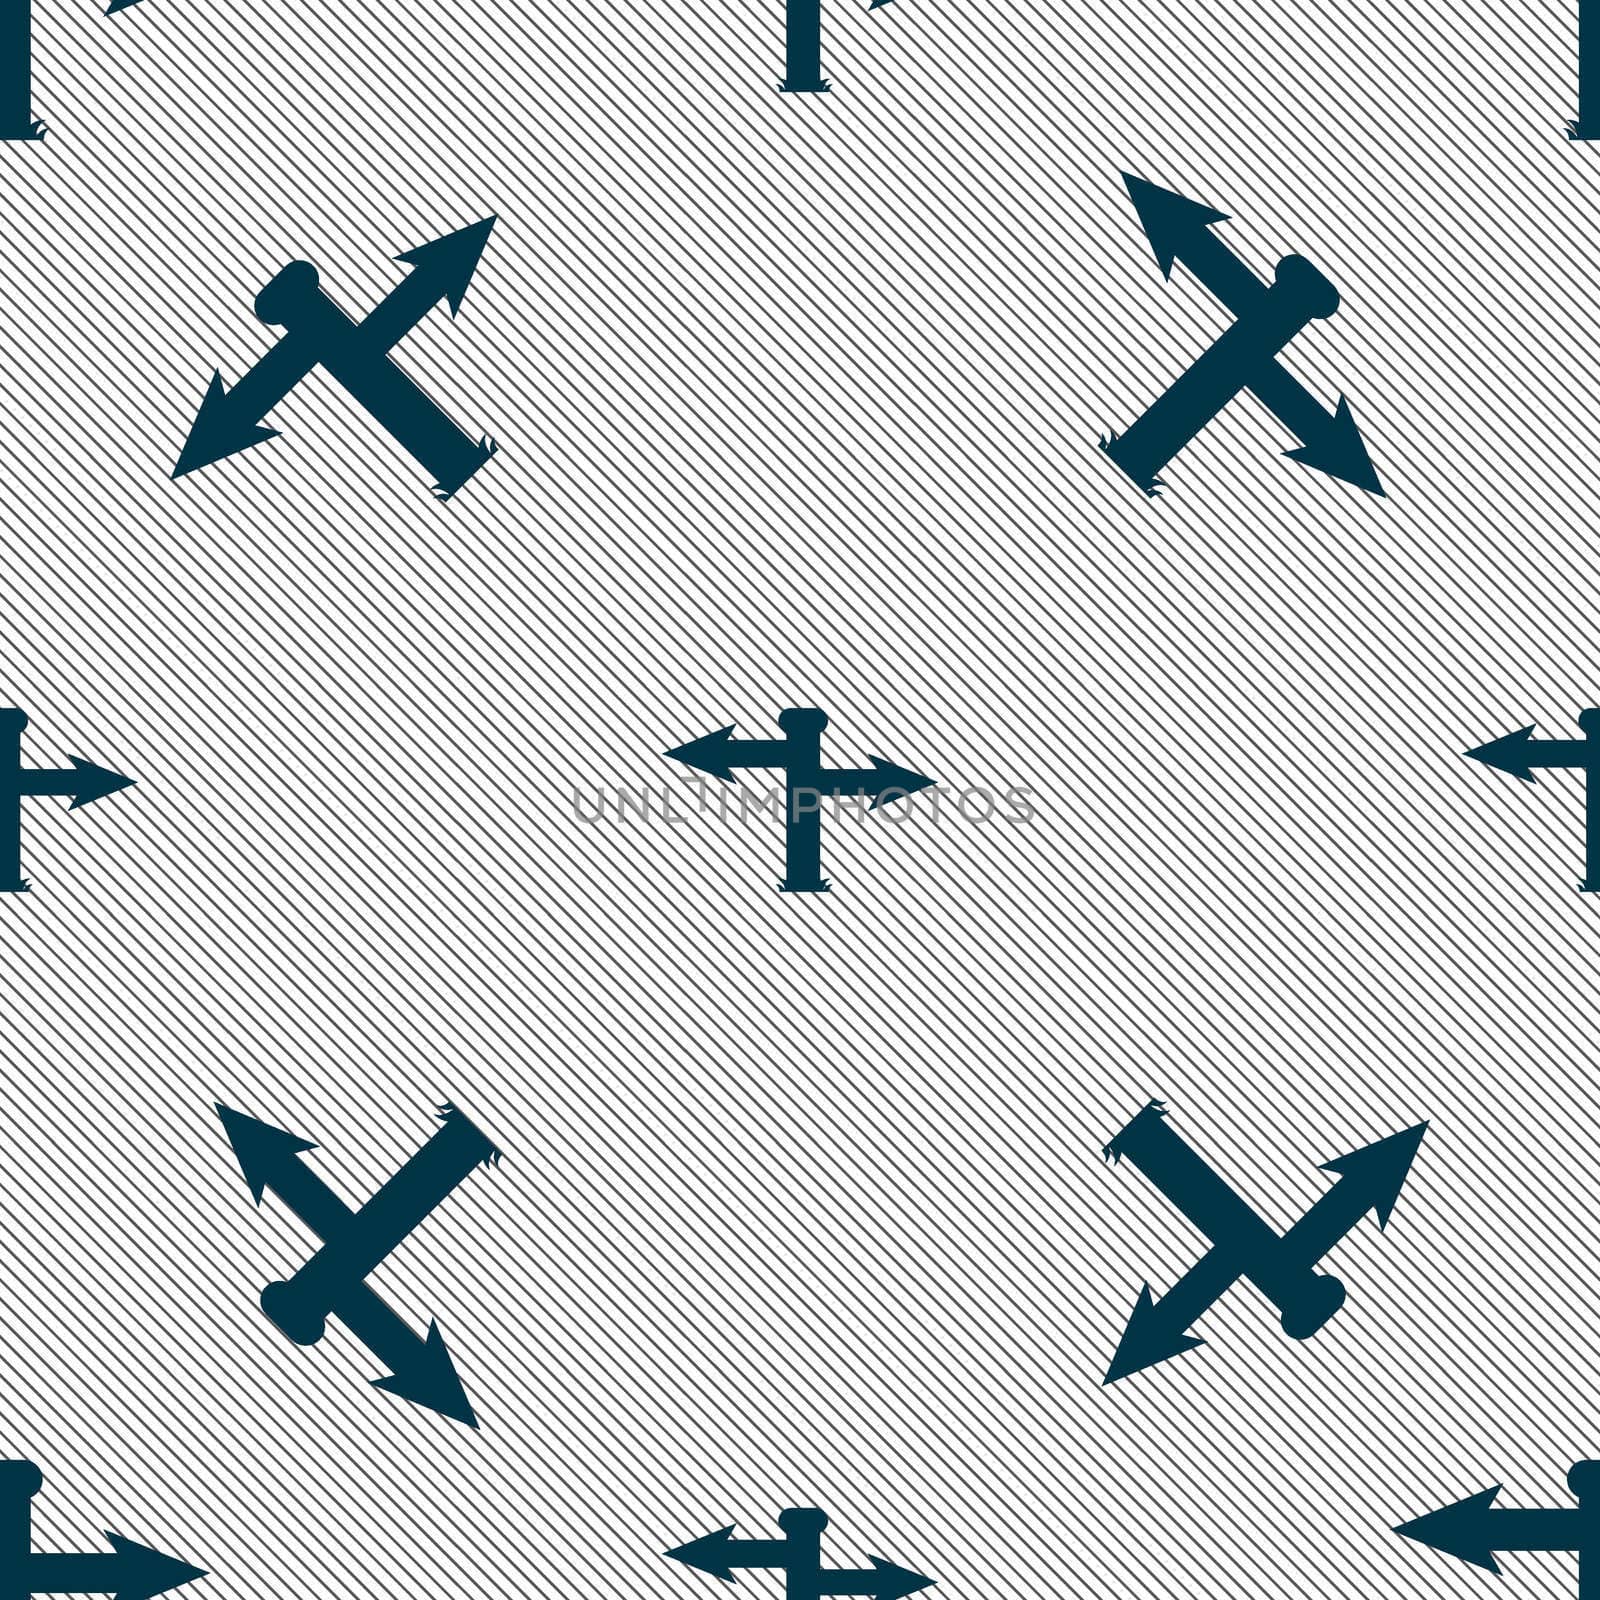 Blank Road Sign icon sign. Seamless pattern with geometric texture. illustration